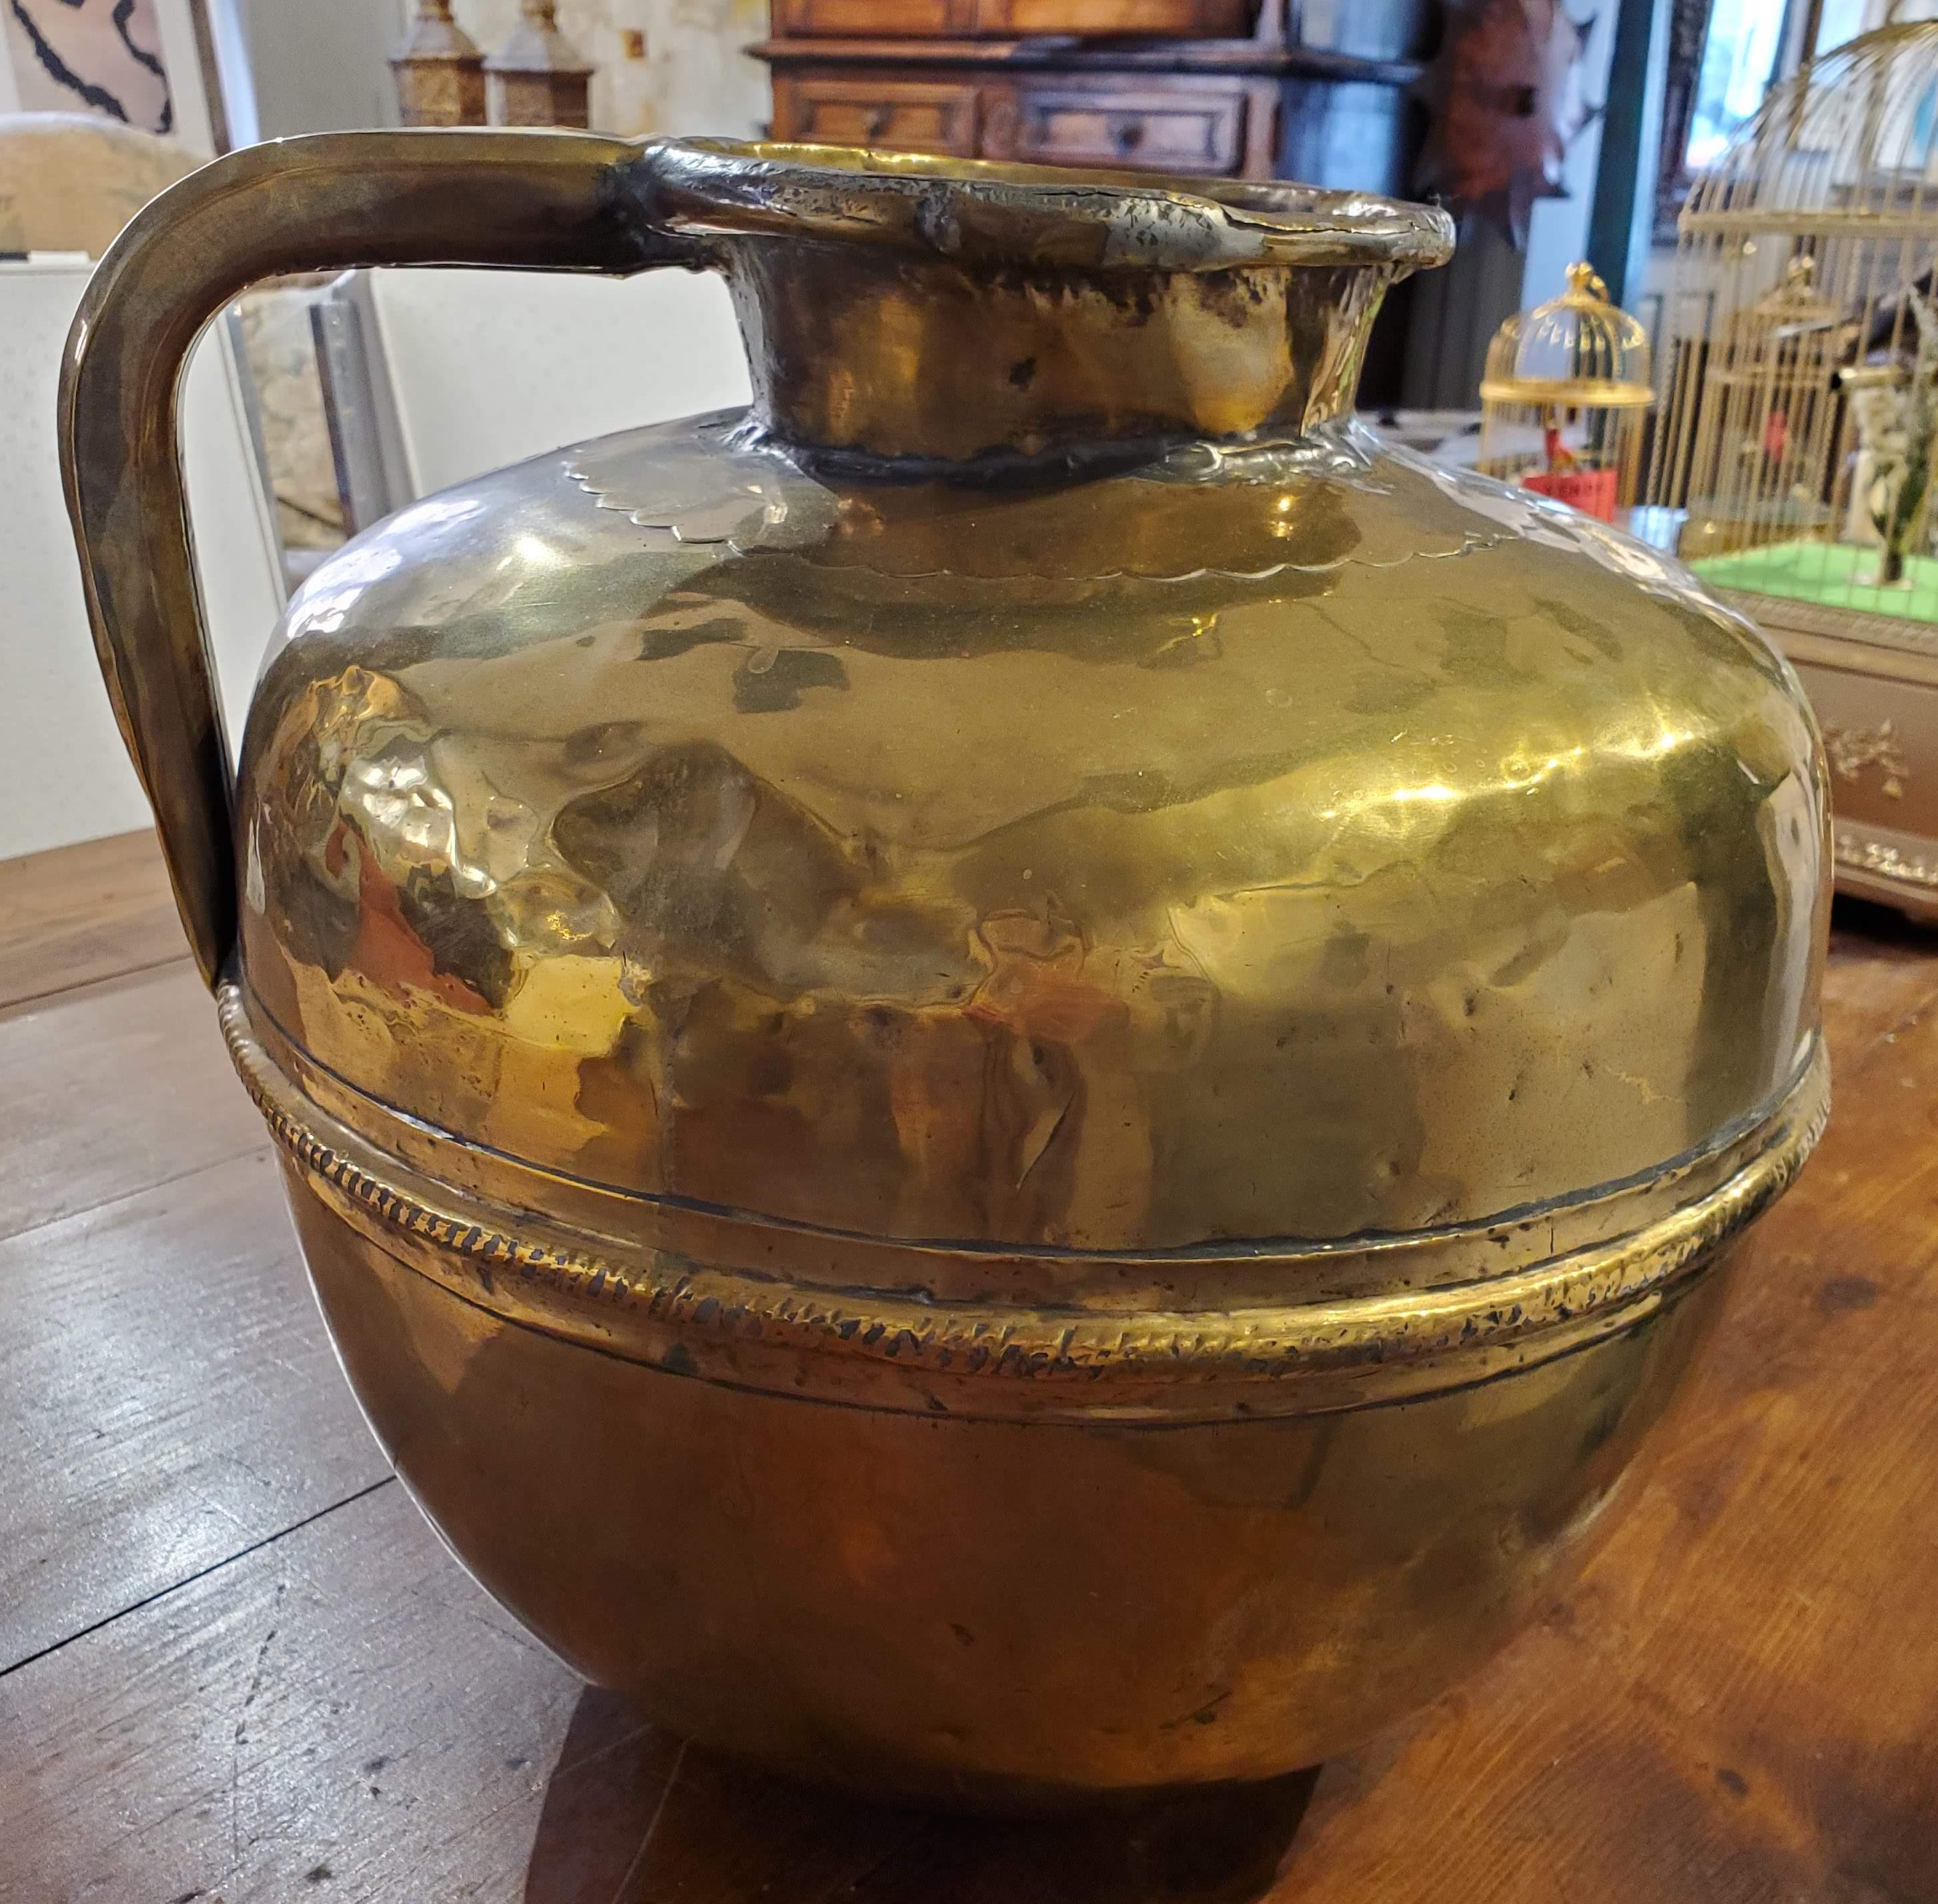 Early 19th century French Provincial brass pitcher. Good proportions with decorative details. French pitcher that could fit into your Greco-Roman decor.
Provence, circa 1830.
Measures: 13.5” H, 15” Dm.